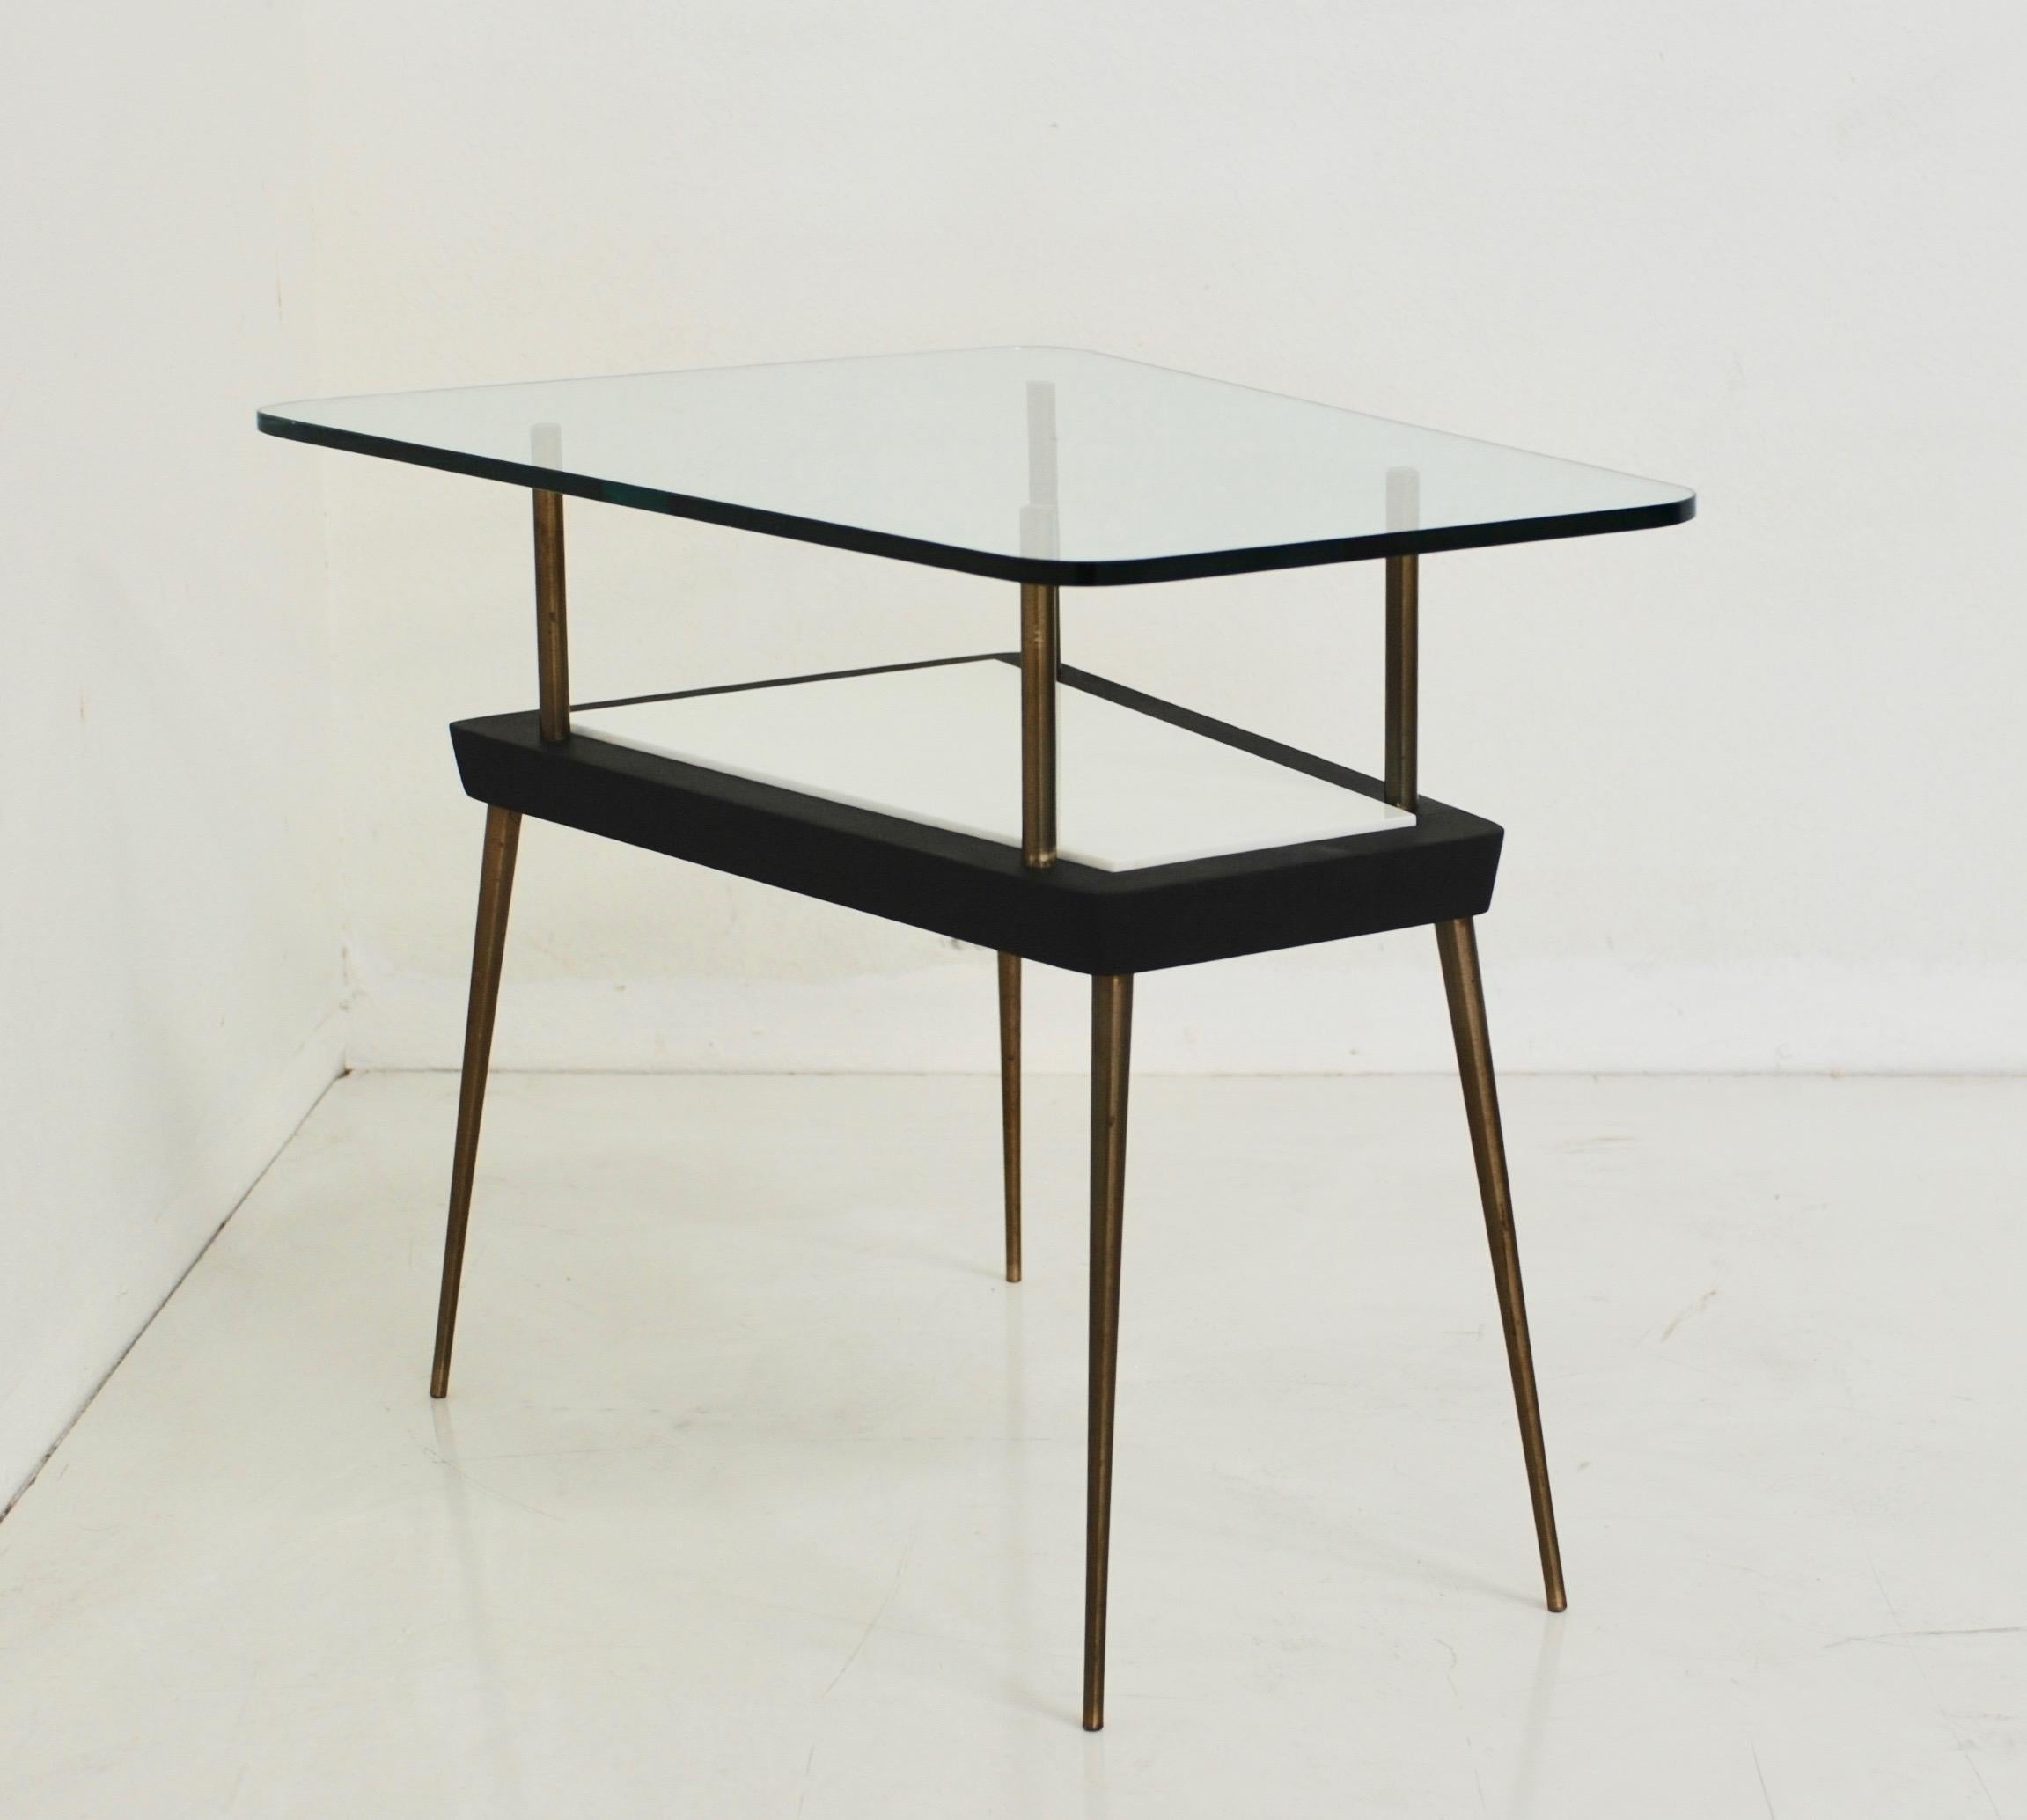 An Italian or French side or end table is made of wood with a white glass insert and clear glass top and elegant thin brass legs. The trapezoid shape of the table is softened with rounded edges. A beautiful elegant example of midcentury style.